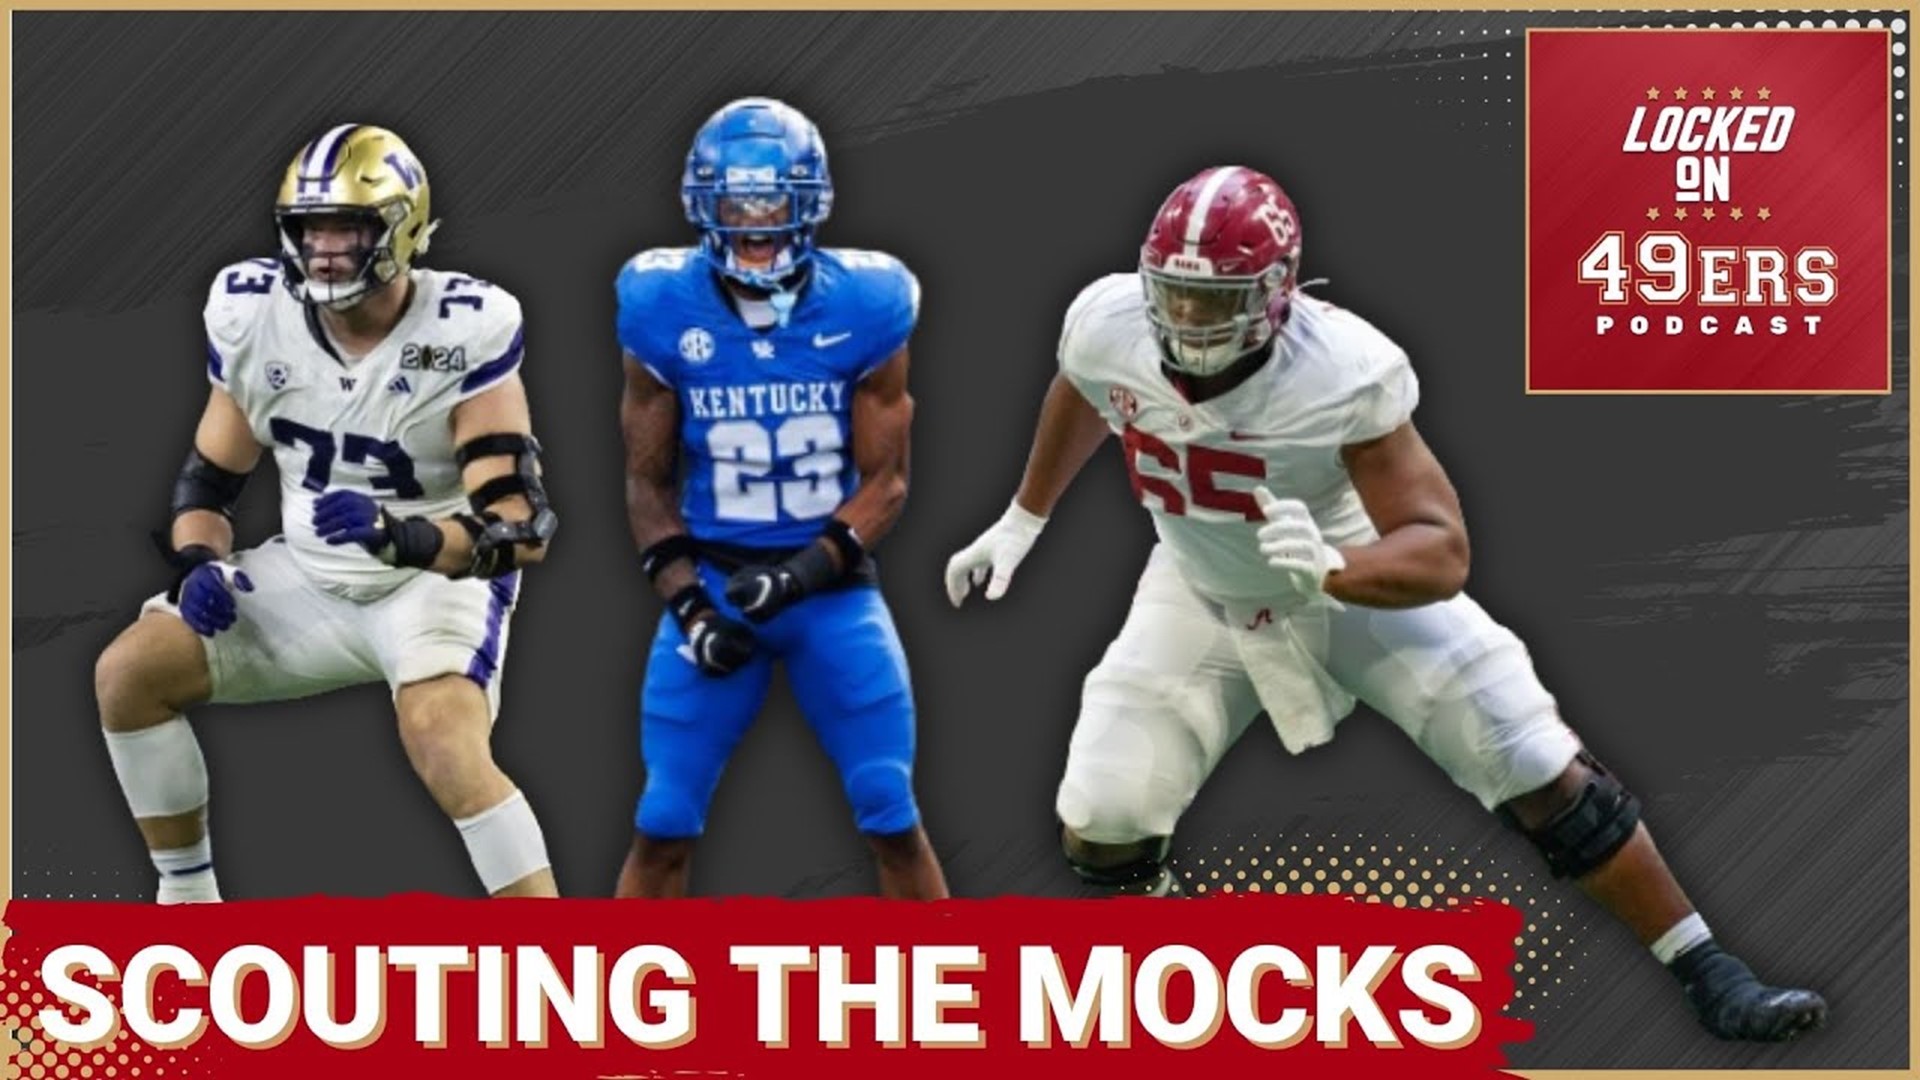 Scouting reports and San Francisco 49ers NFL Draft fits for Washington tackle Roger Rosengarten, JC Latham of Alabama, and Kentucky cornerback Andru Philllips.